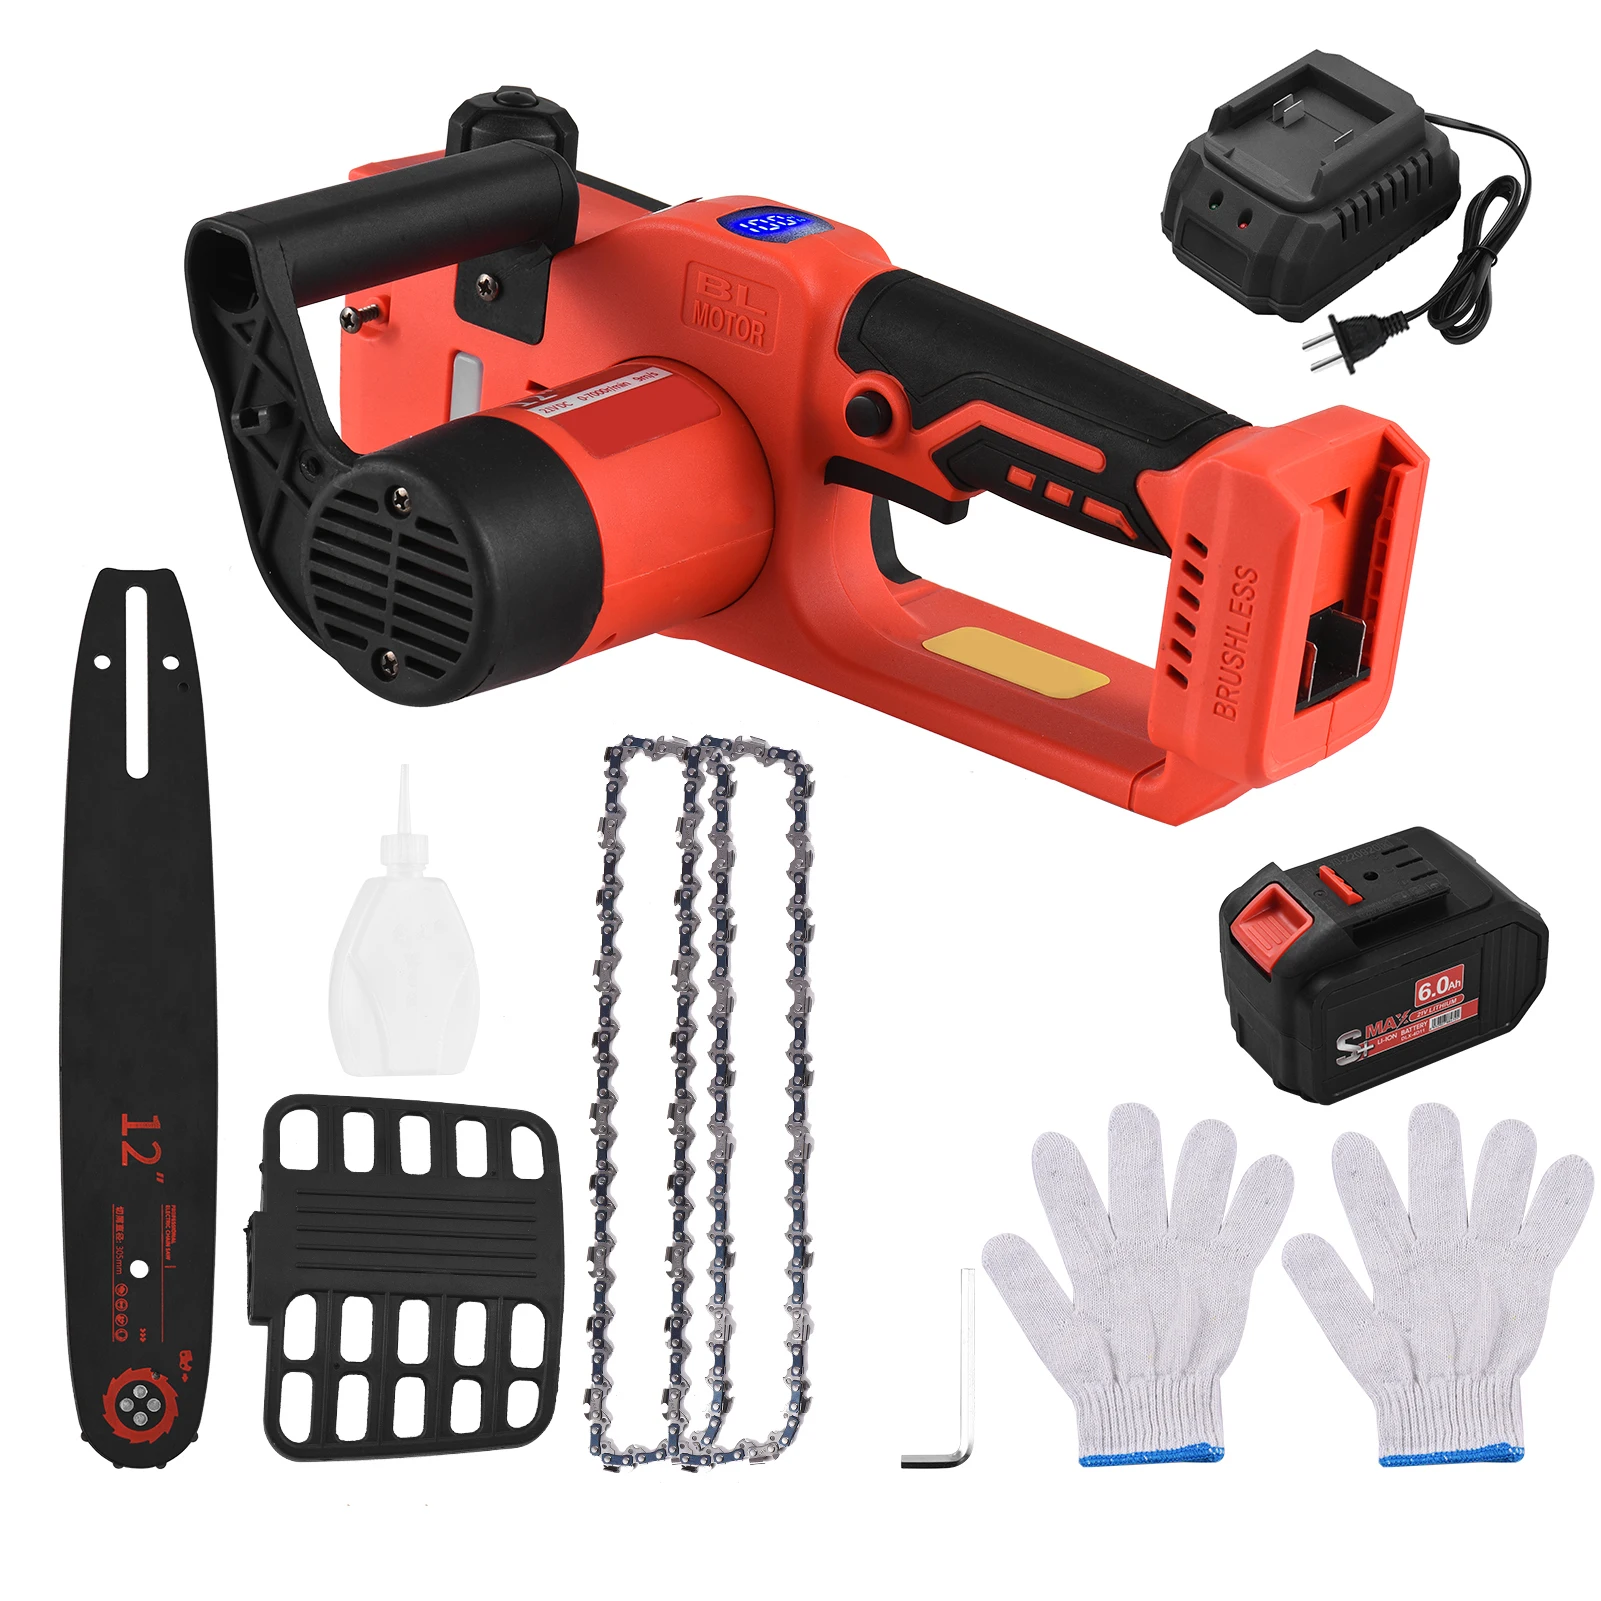 https://ae01.alicdn.com/kf/S16f906cea5bc4c6392e4aaad1efde20e4/21V-Brushless-Cordless-Chainsaw-12-inch-Electric-Chain-Saw-Handheld-Pruning-Saw-Portable-Woodworking-Electric-Saw.jpg